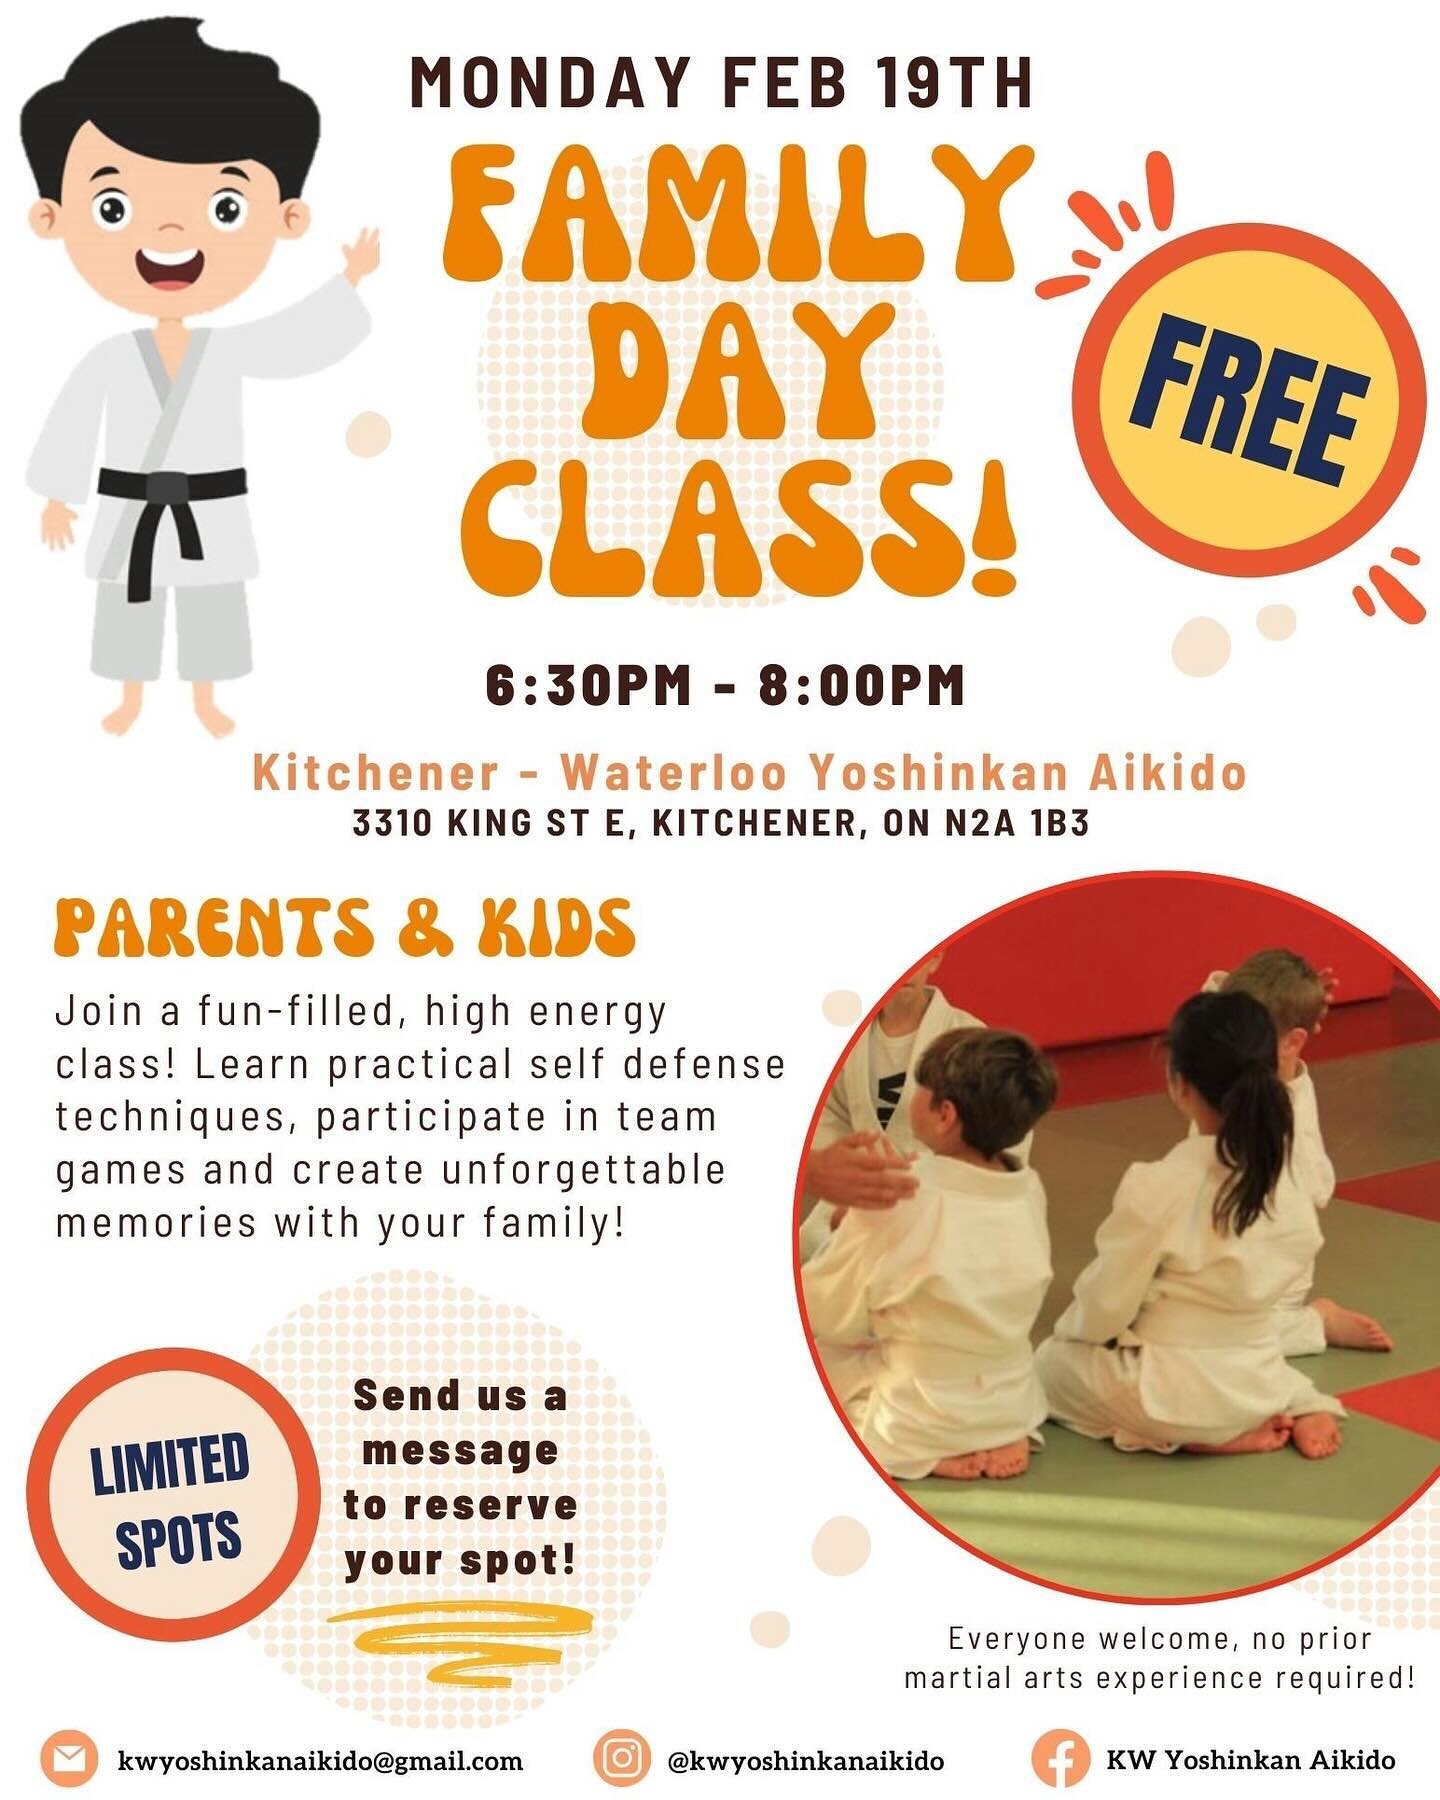 👨&zwj;👩&zwj;👧&zwj;👦 Ready for a family adventure? Dive into a world of fun and self defence with our FREE Family Day Martial Arts Class! 🥷🌟 

Join us for a day of learning and bonding through the power of aikido. No experience needed &ndash; ju